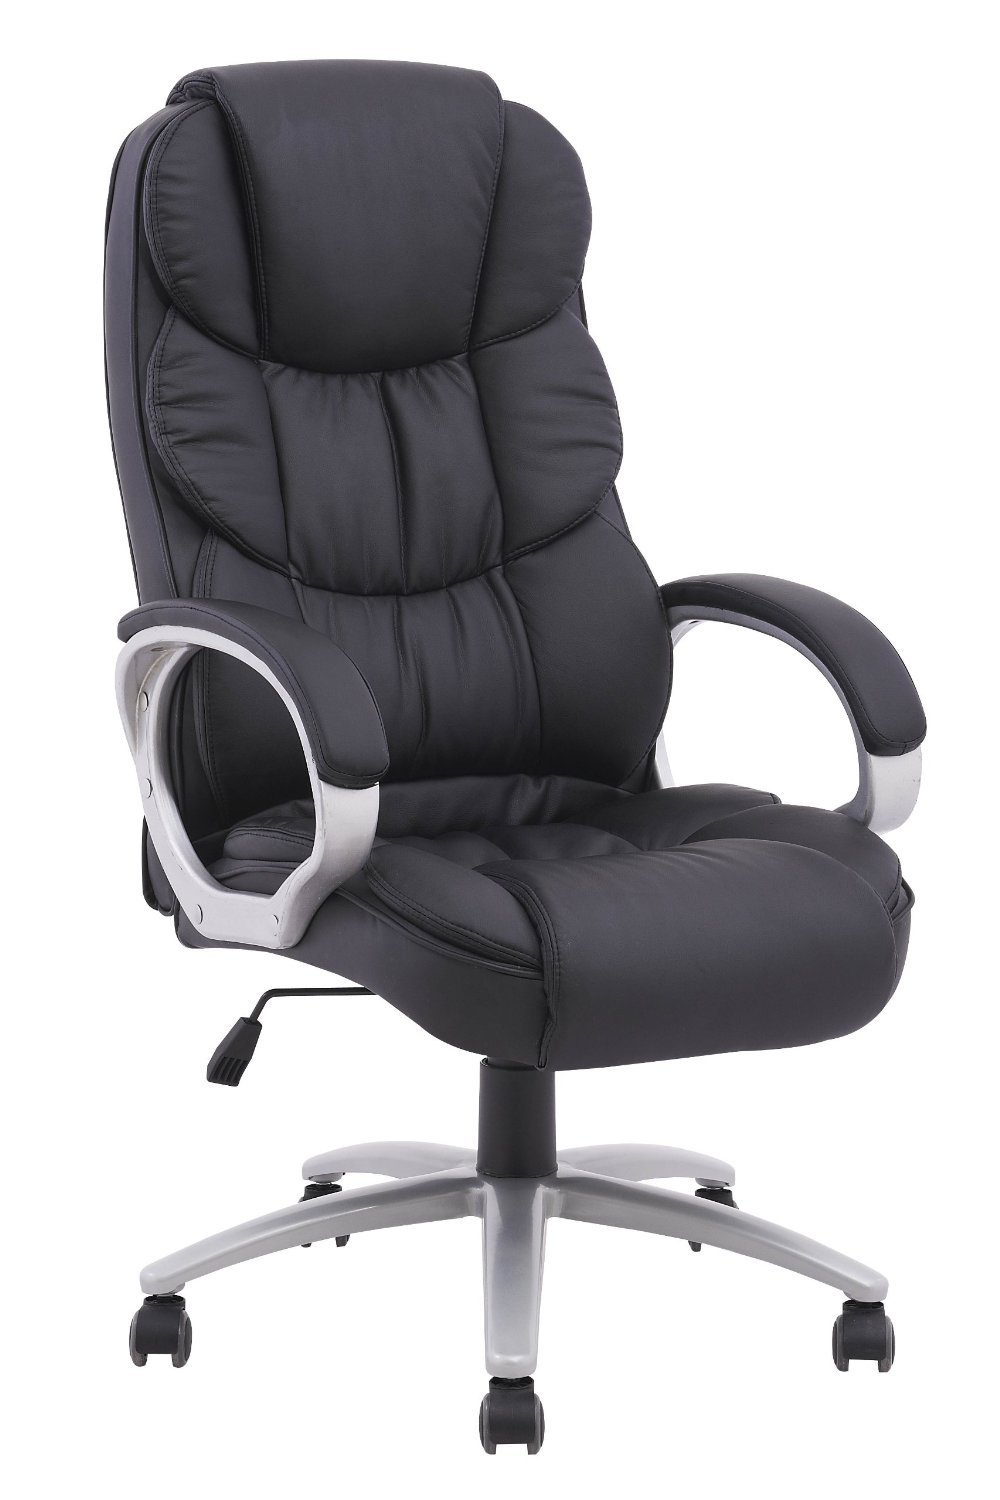 Best Chair For Home Recording Studio